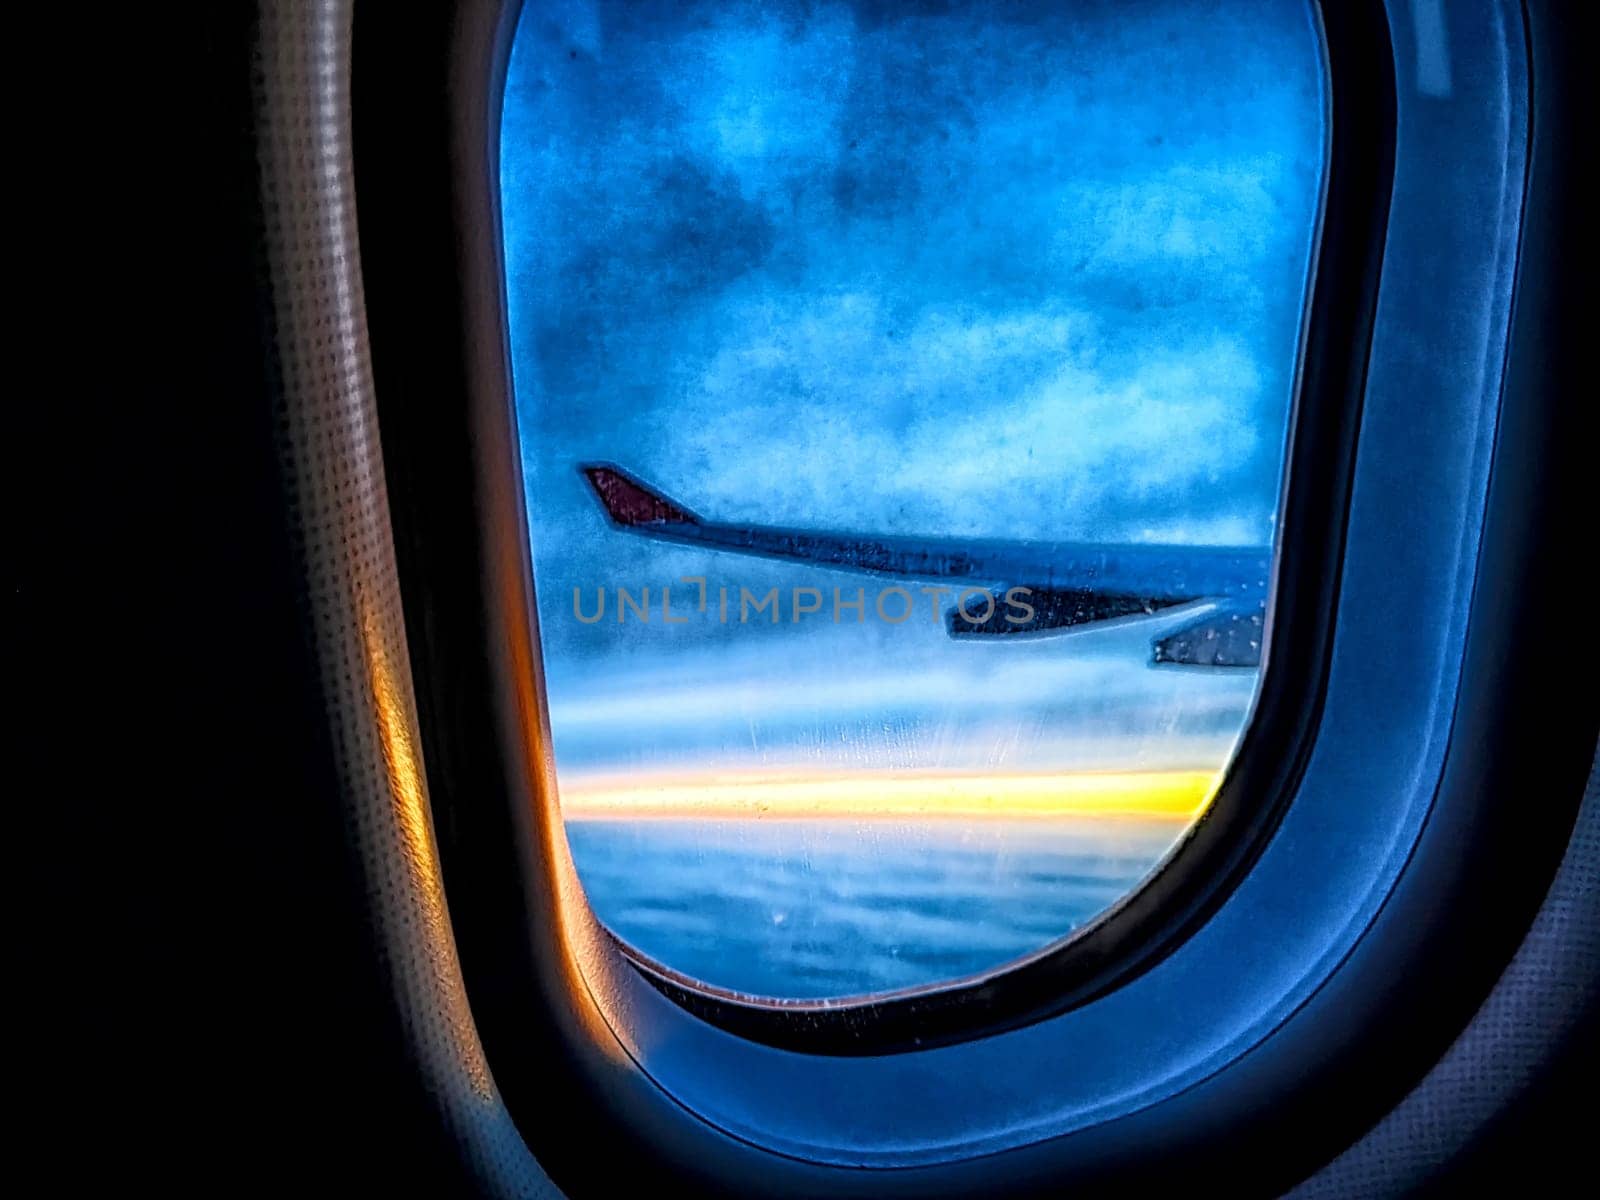 Airplane wing, clouds and sunrise through plane window. Wing silhouetted against vibrant sky and clouds. Sunset Horizon View From Airplane. Blurred